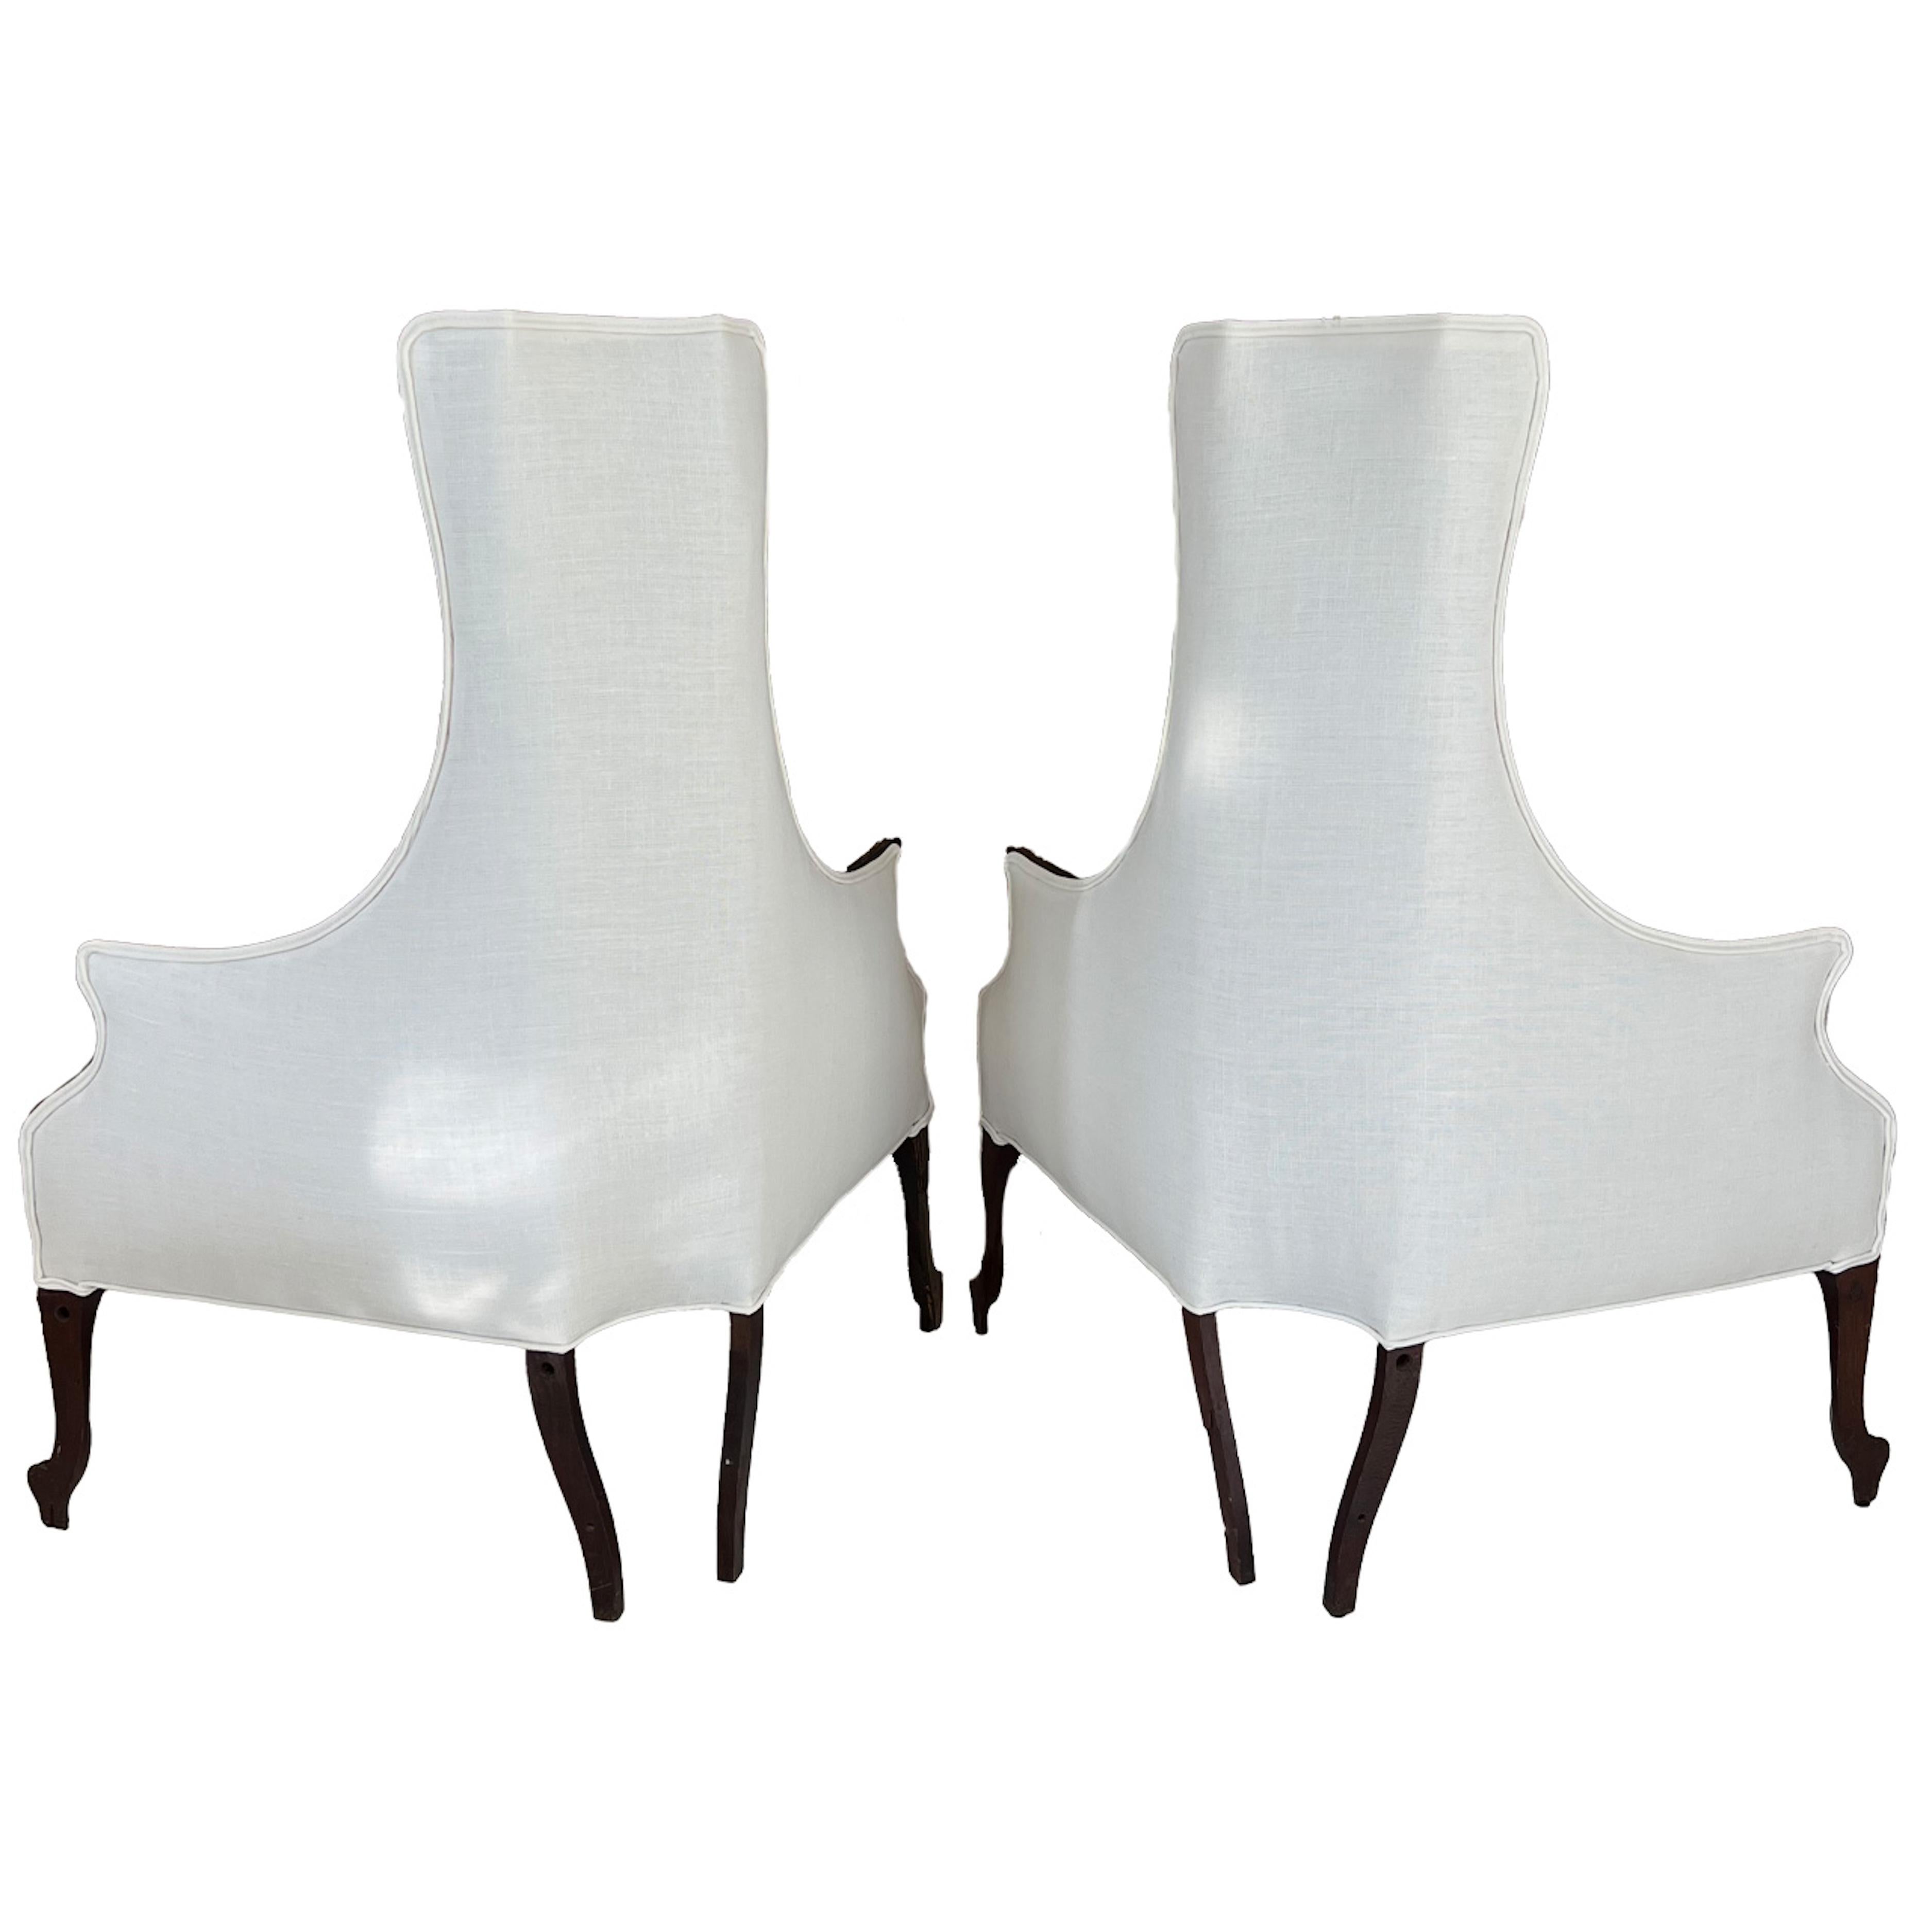 Corner chairs that demand attention. Wood with gilded accents and new white Belgian linen upholstery make these chairs a stand out.